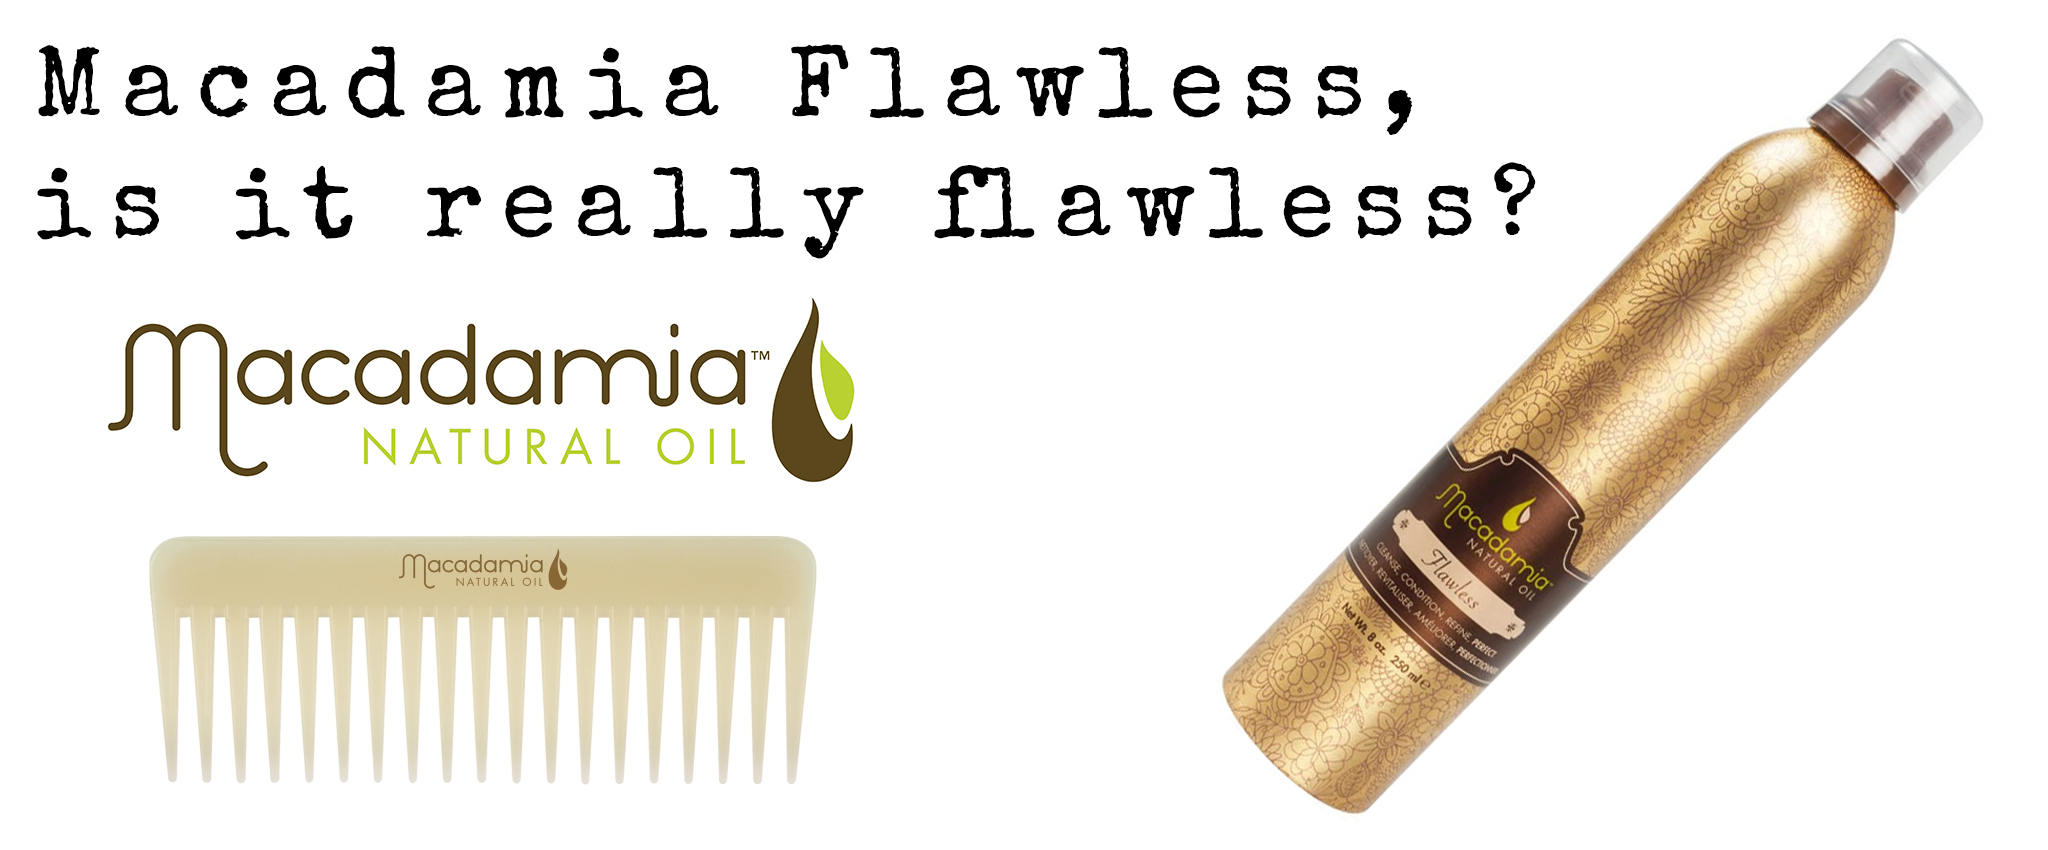 Macadamia Flawless is it really flawless?